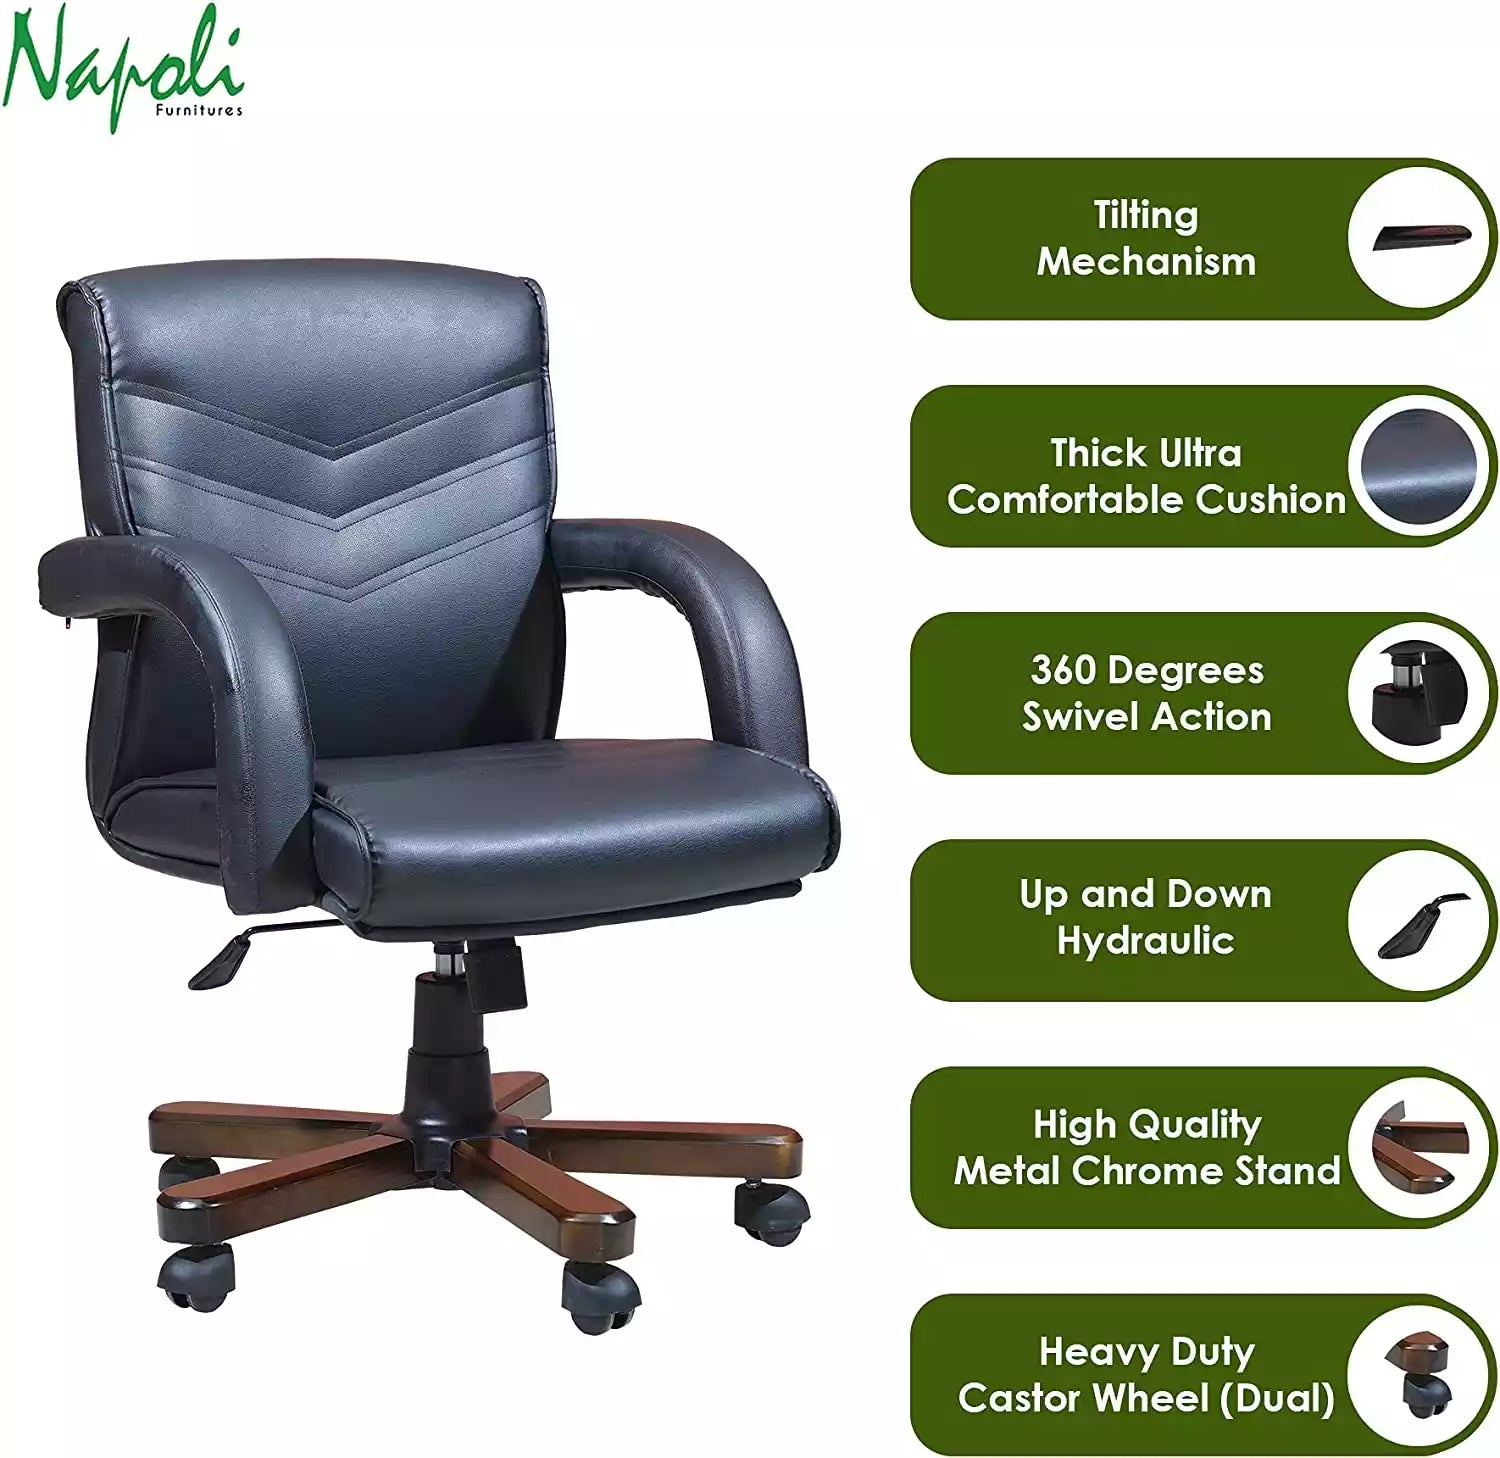 Office Chair, with Adjustable Height and Lumbar Support, Black Color